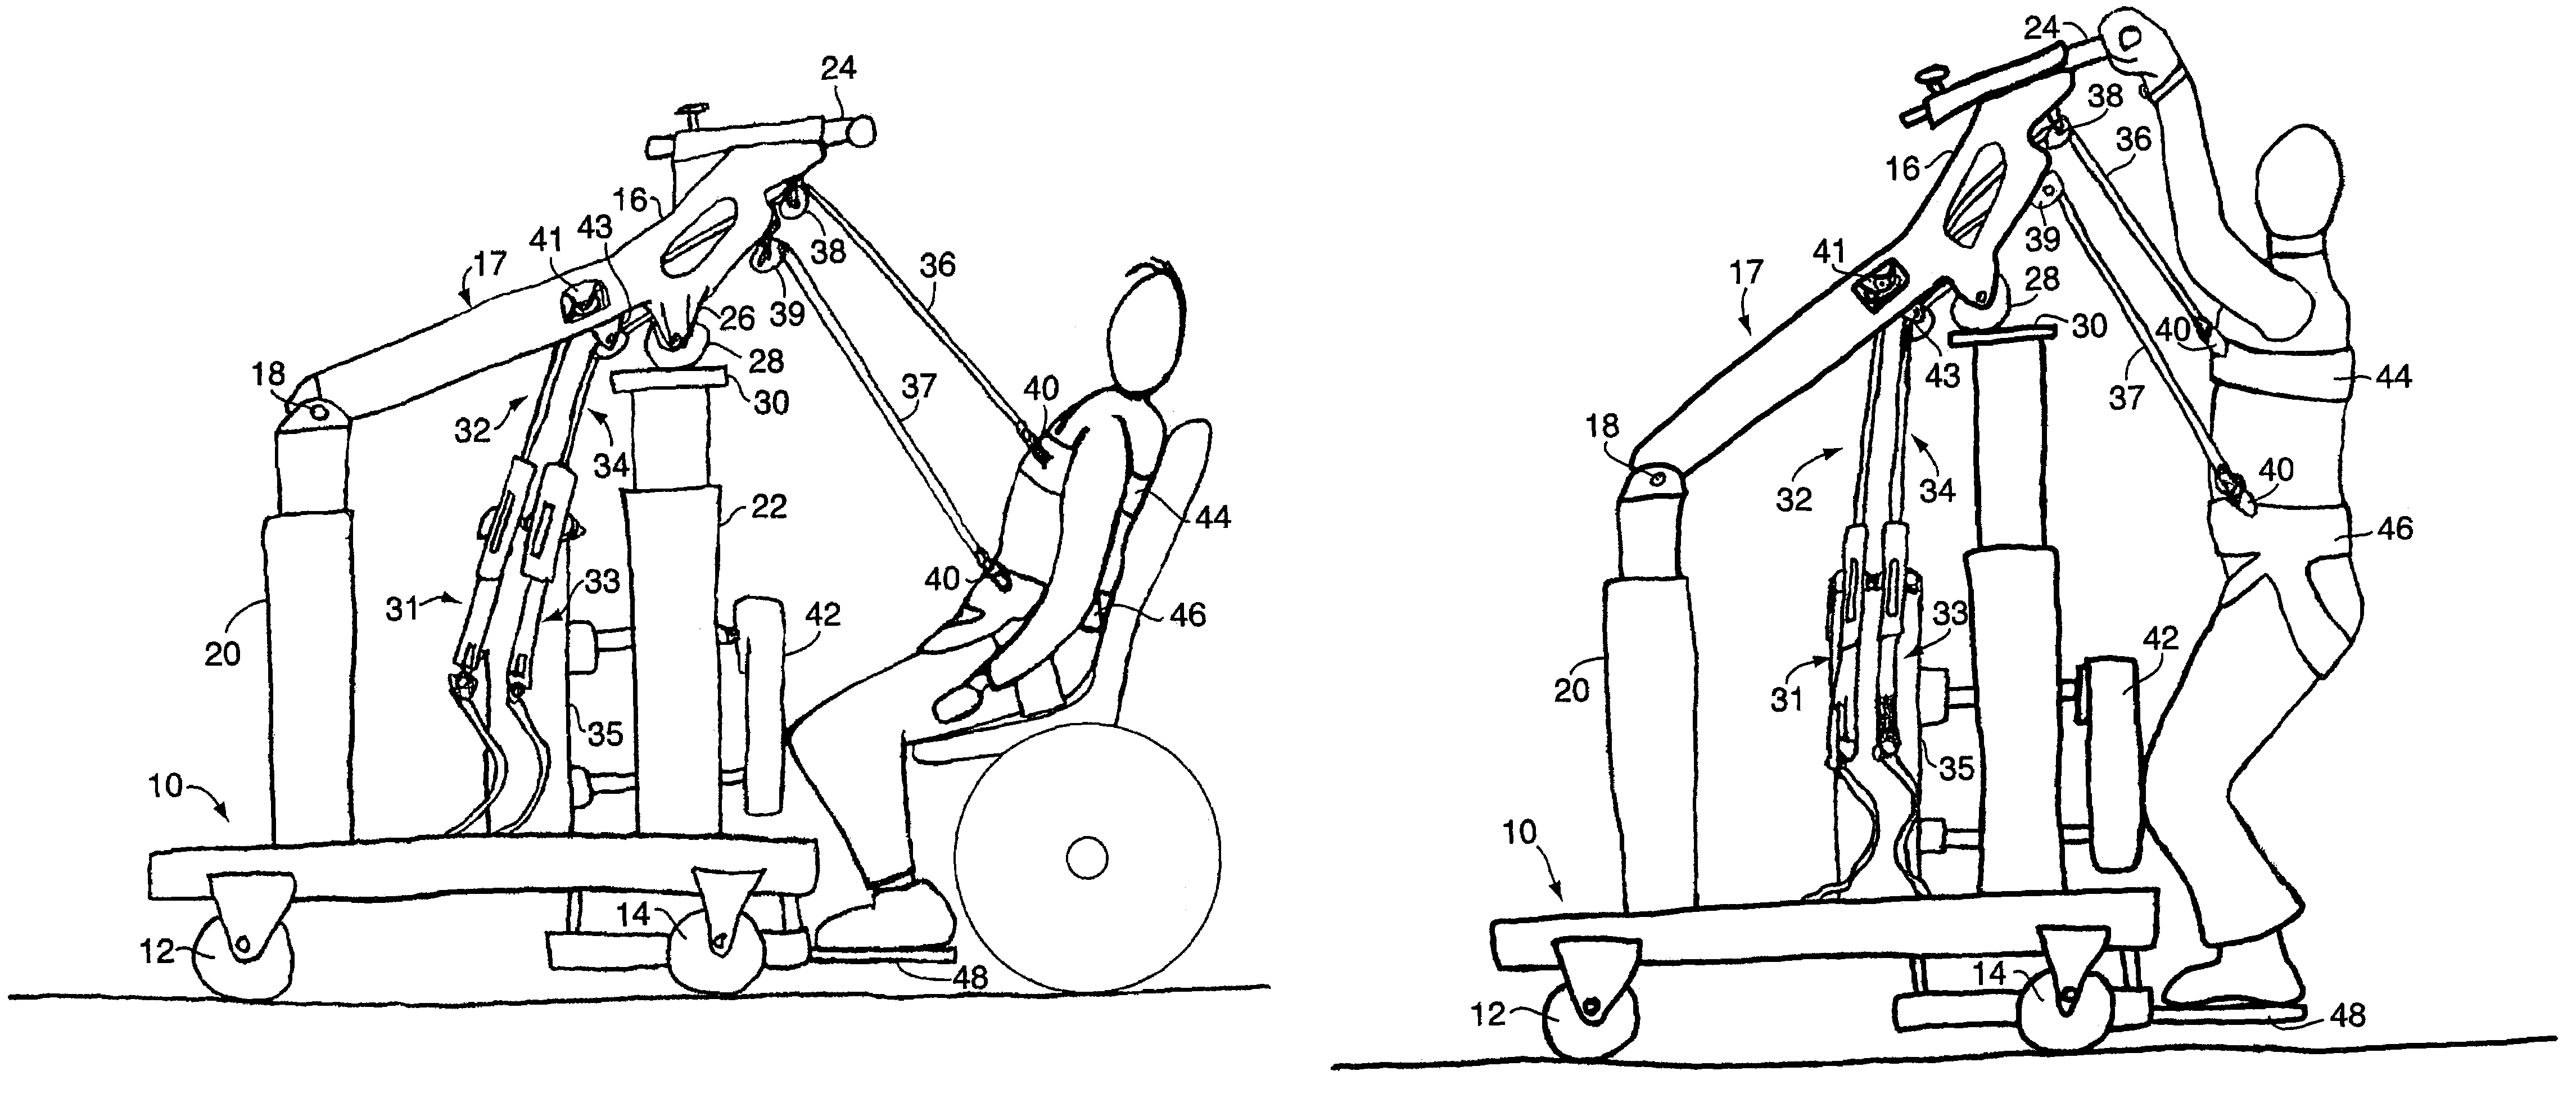 Sit to stand support apparatus